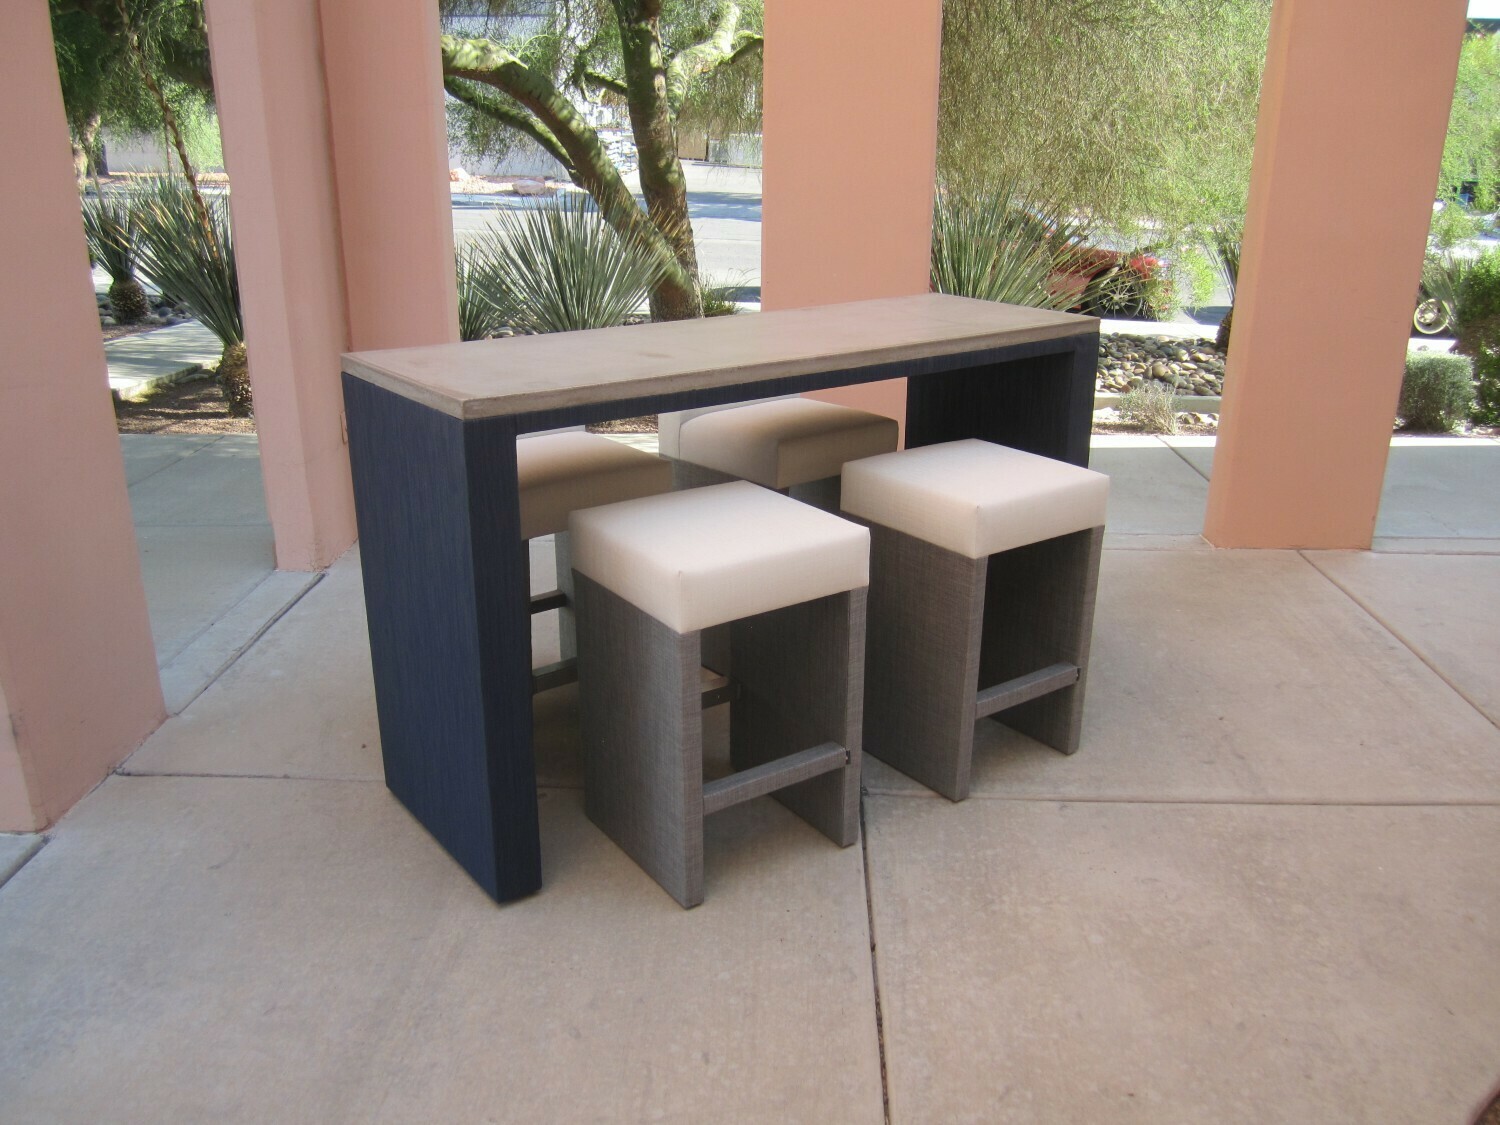 Resort Style 5 Piece High Top Table Set-One 6ft Concrete High Top Height Table & 4 Backless Barstools